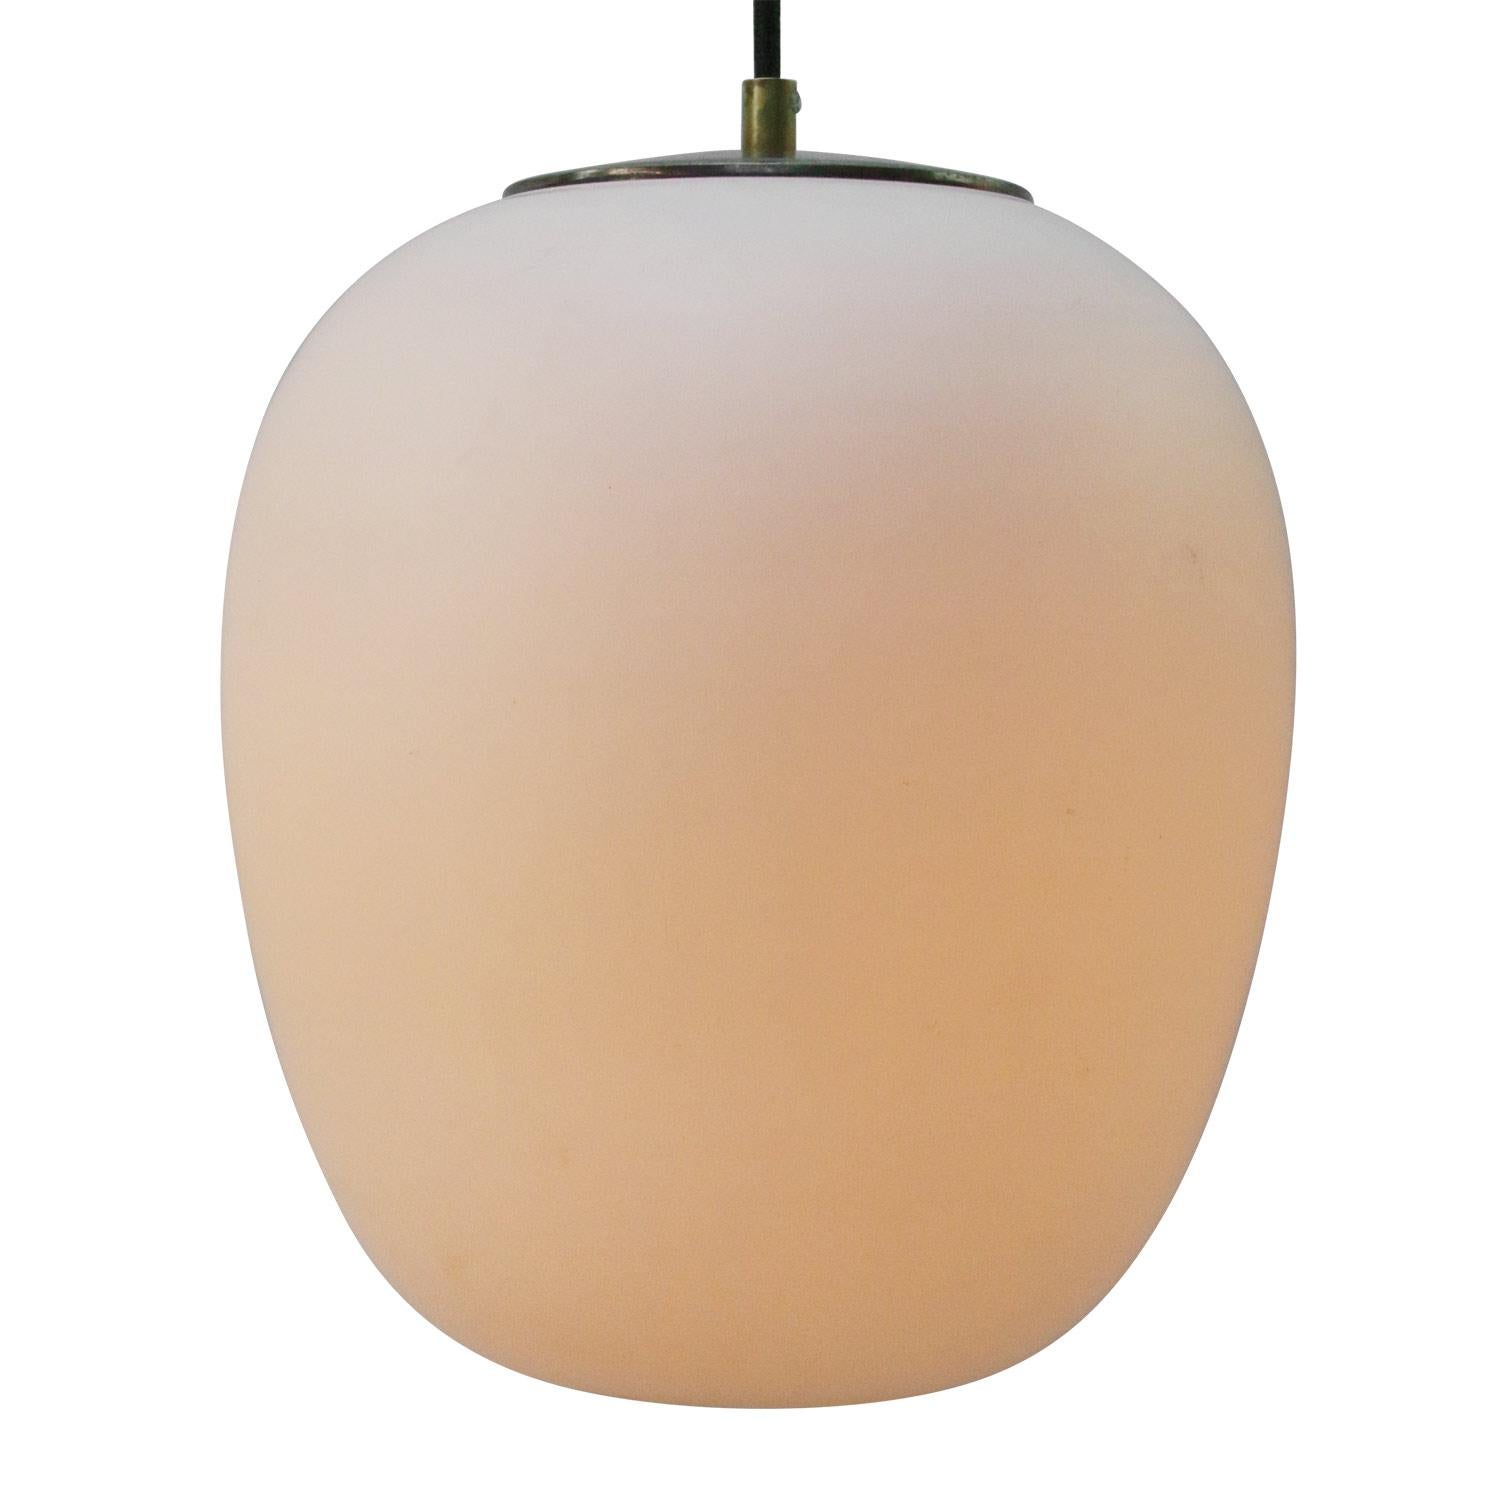 Mat Opaline milk glass pendant.
2 meter black wire

Weight: 2.30 kg / 5.1 lb

Priced per individual item. All lamps have been made suitable by international standards for incandescent light bulbs, energy-efficient and LED bulbs. E26/E27 bulb